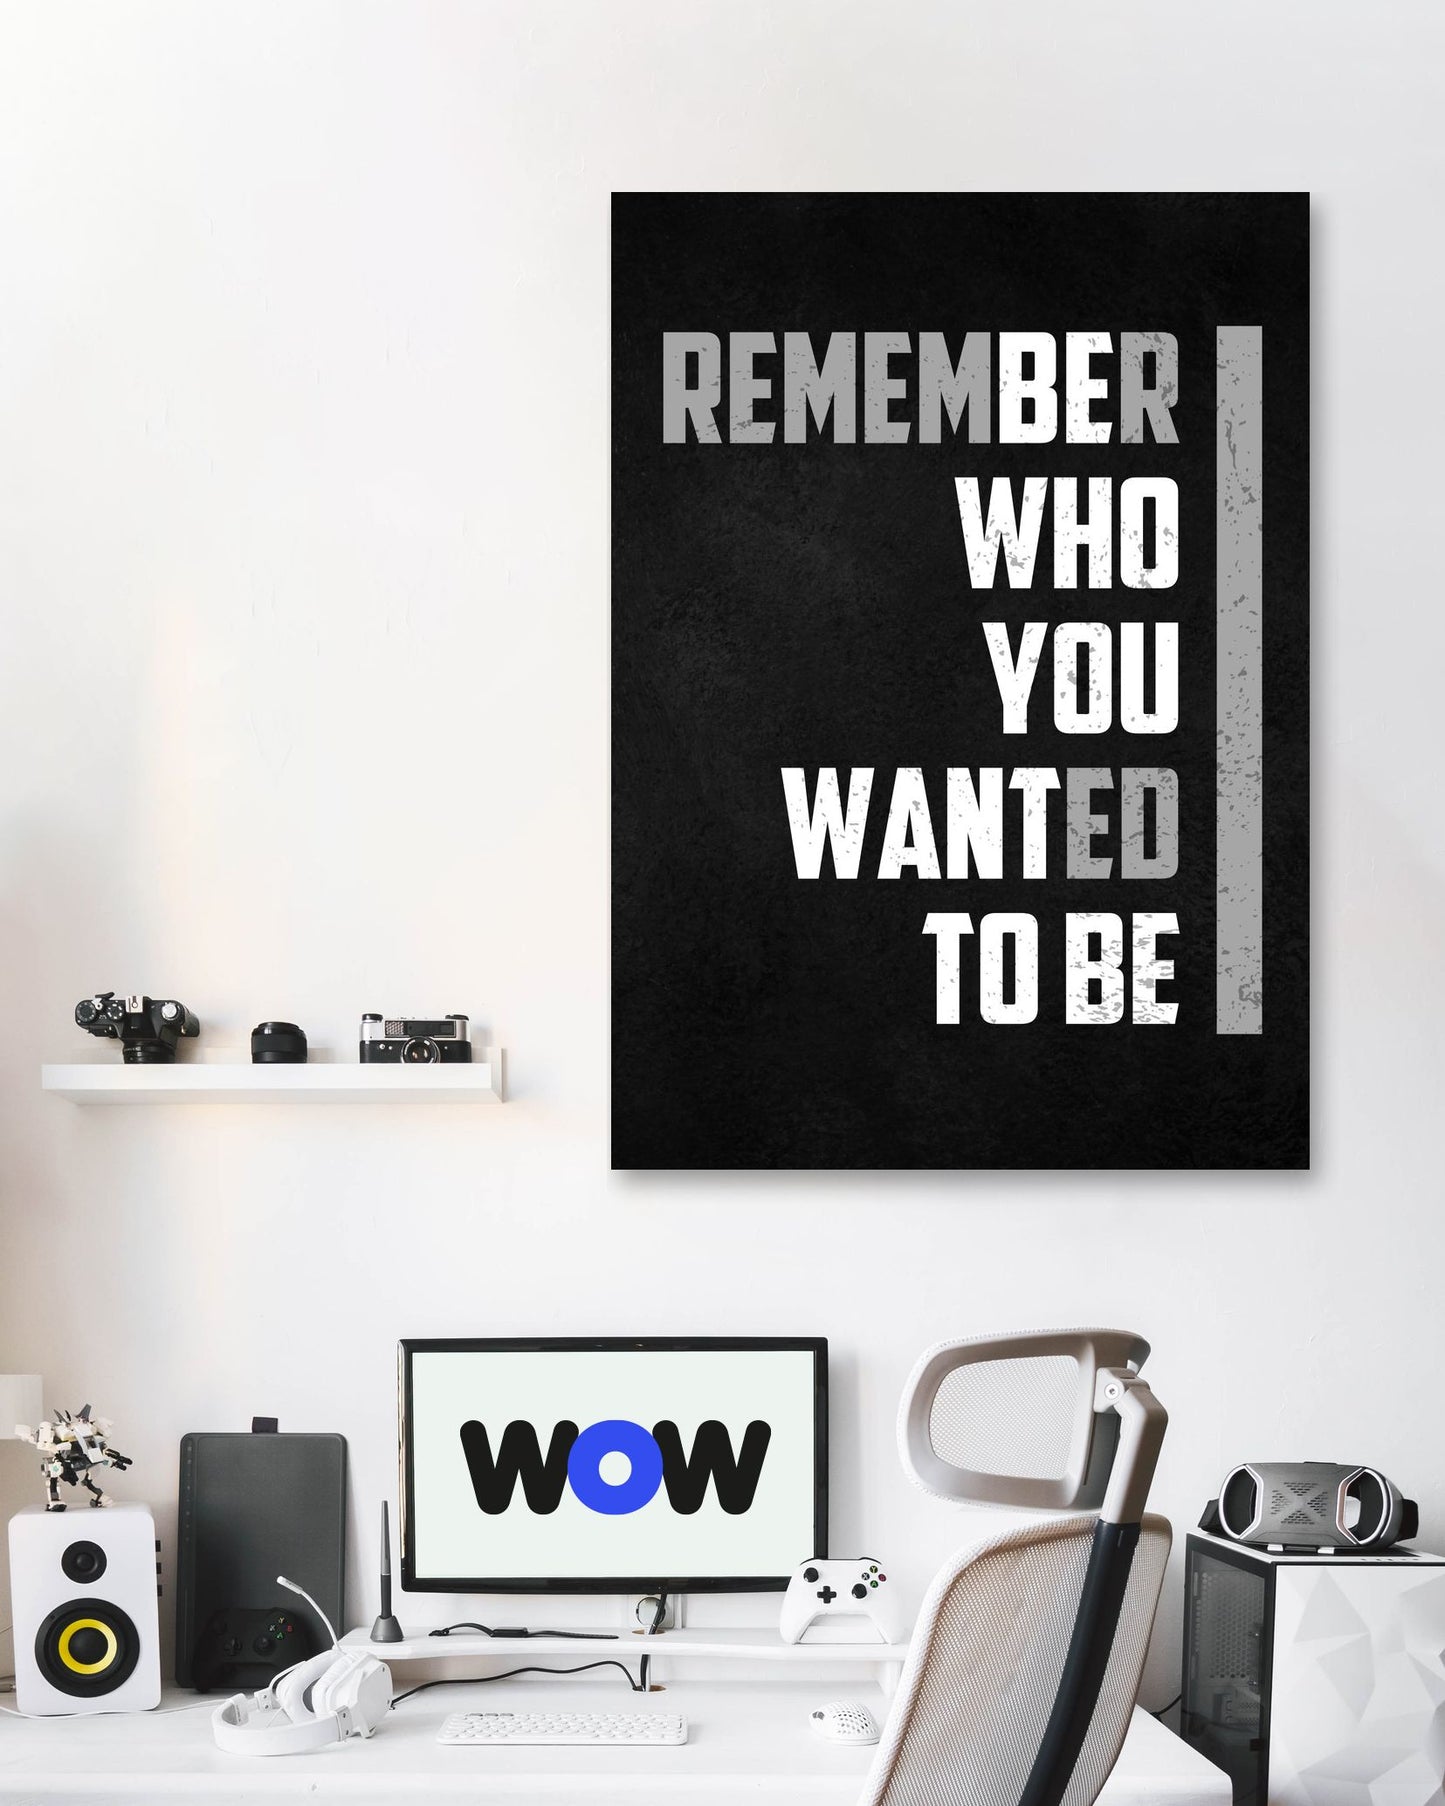 Remember who you wanted to be motivation quote - @seatzy